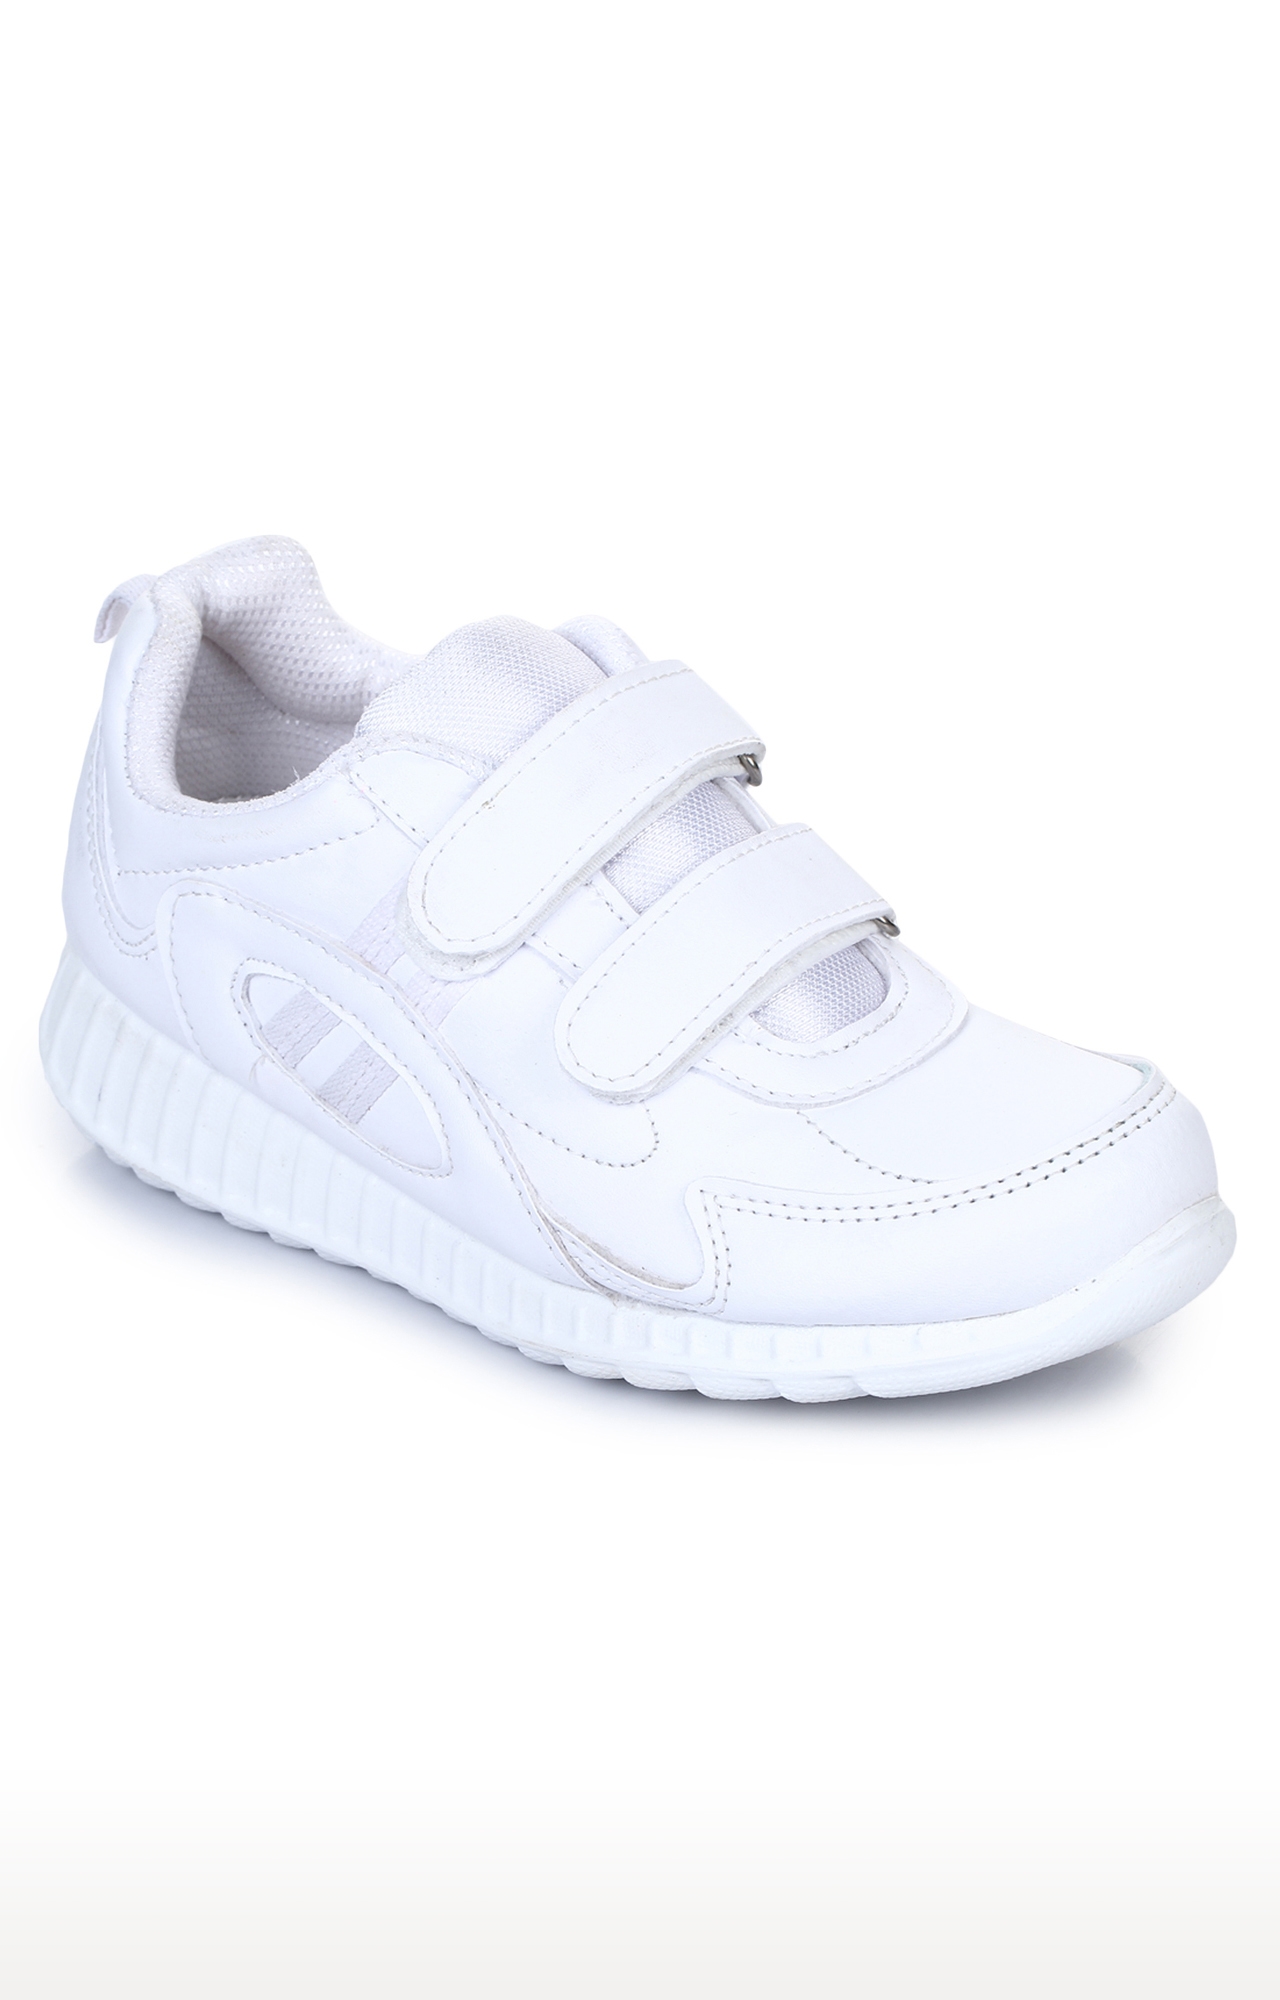 Liberty | Force 10 by Liberty Unisex White Indoor Sports Shoes